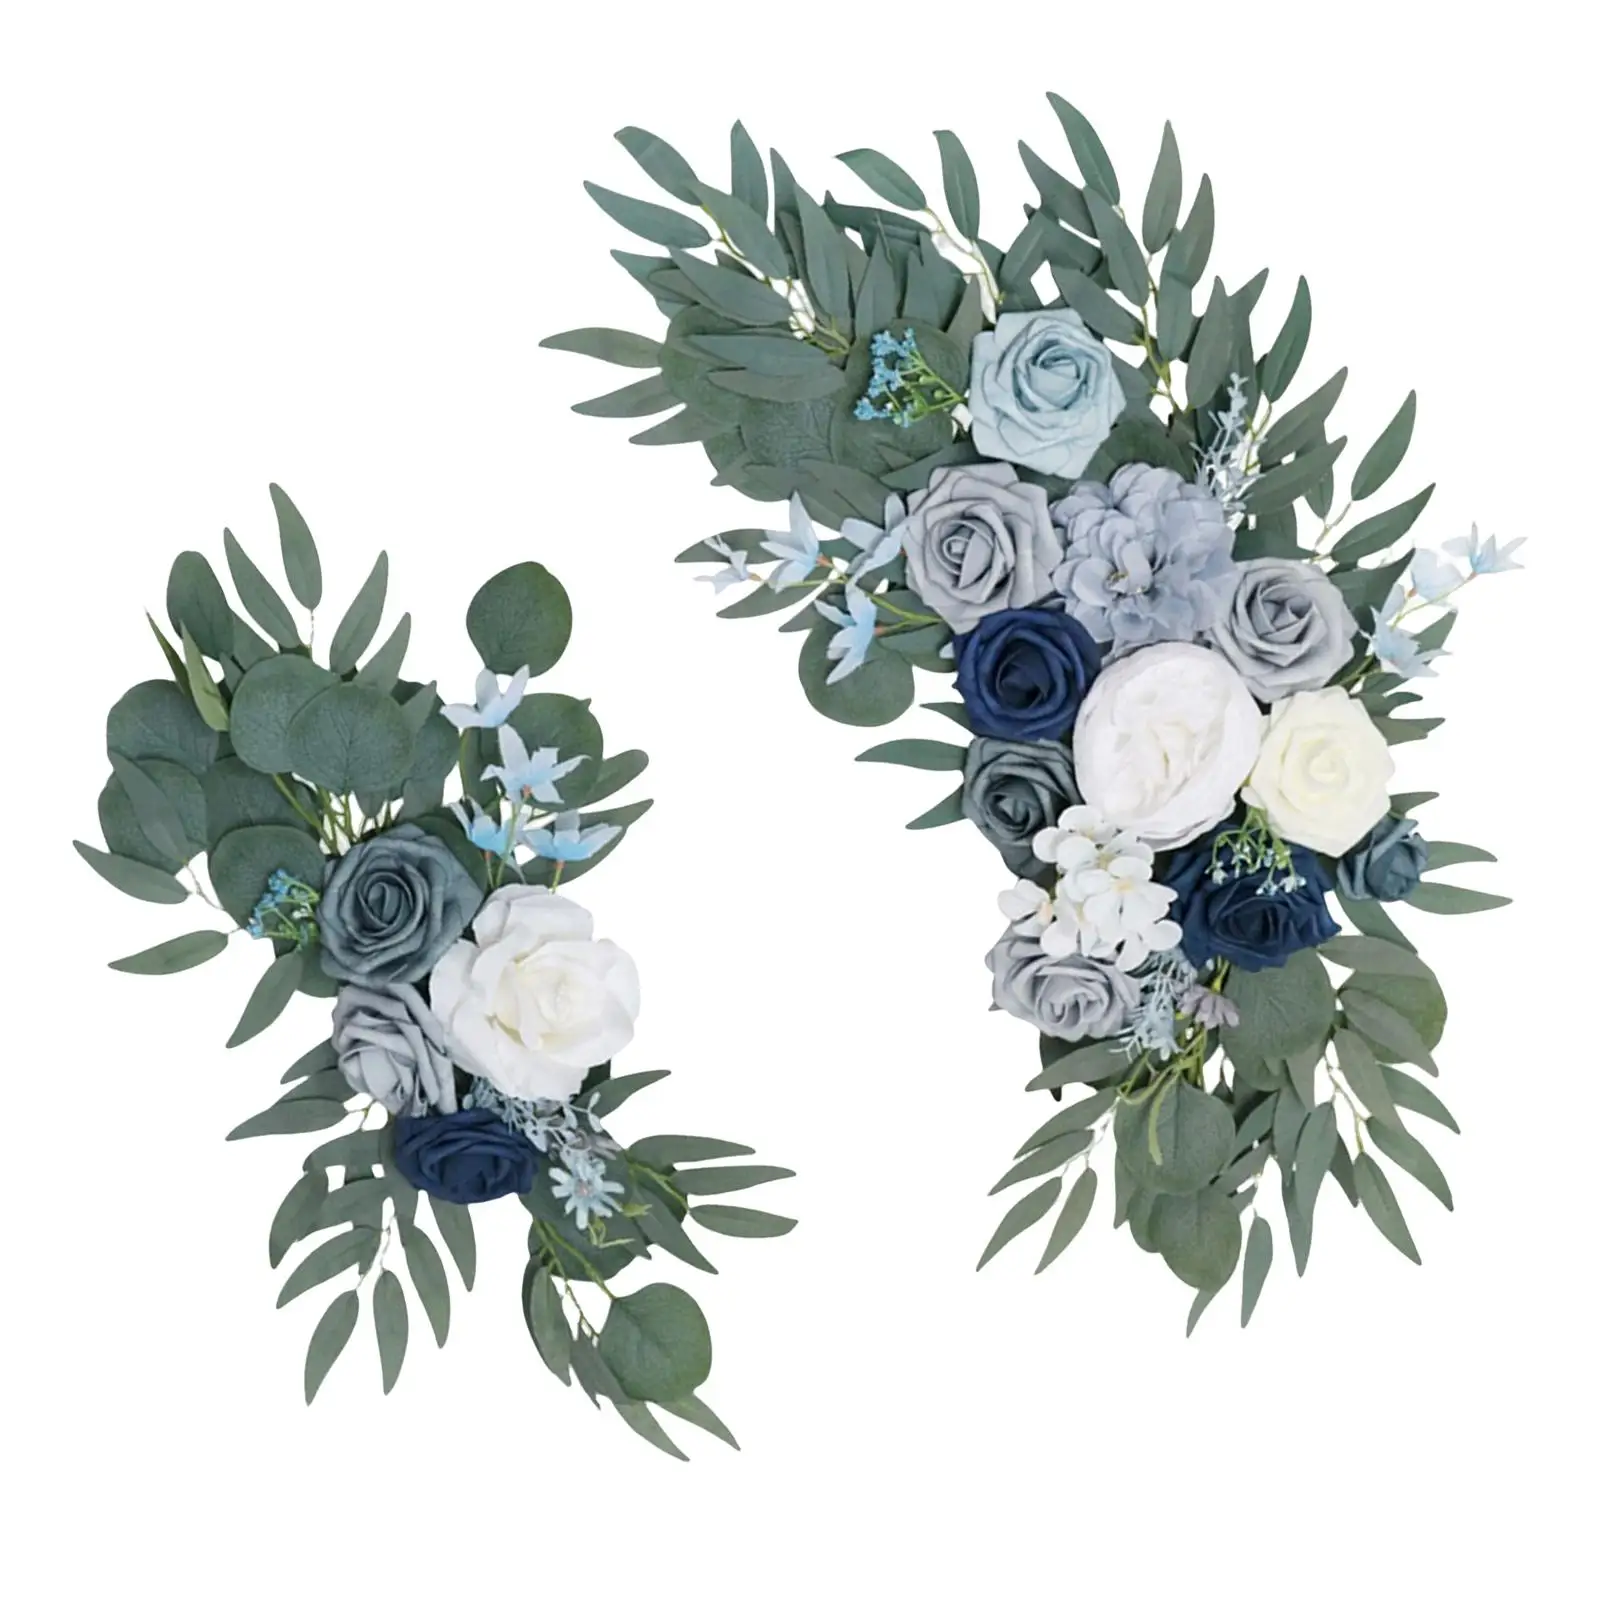 2 Pieces Artificial Rose Flower Swag Floral Arrangement Centerpiece Wedding Arch Flowers for Ceremony Backdrop Wedding Wall Home